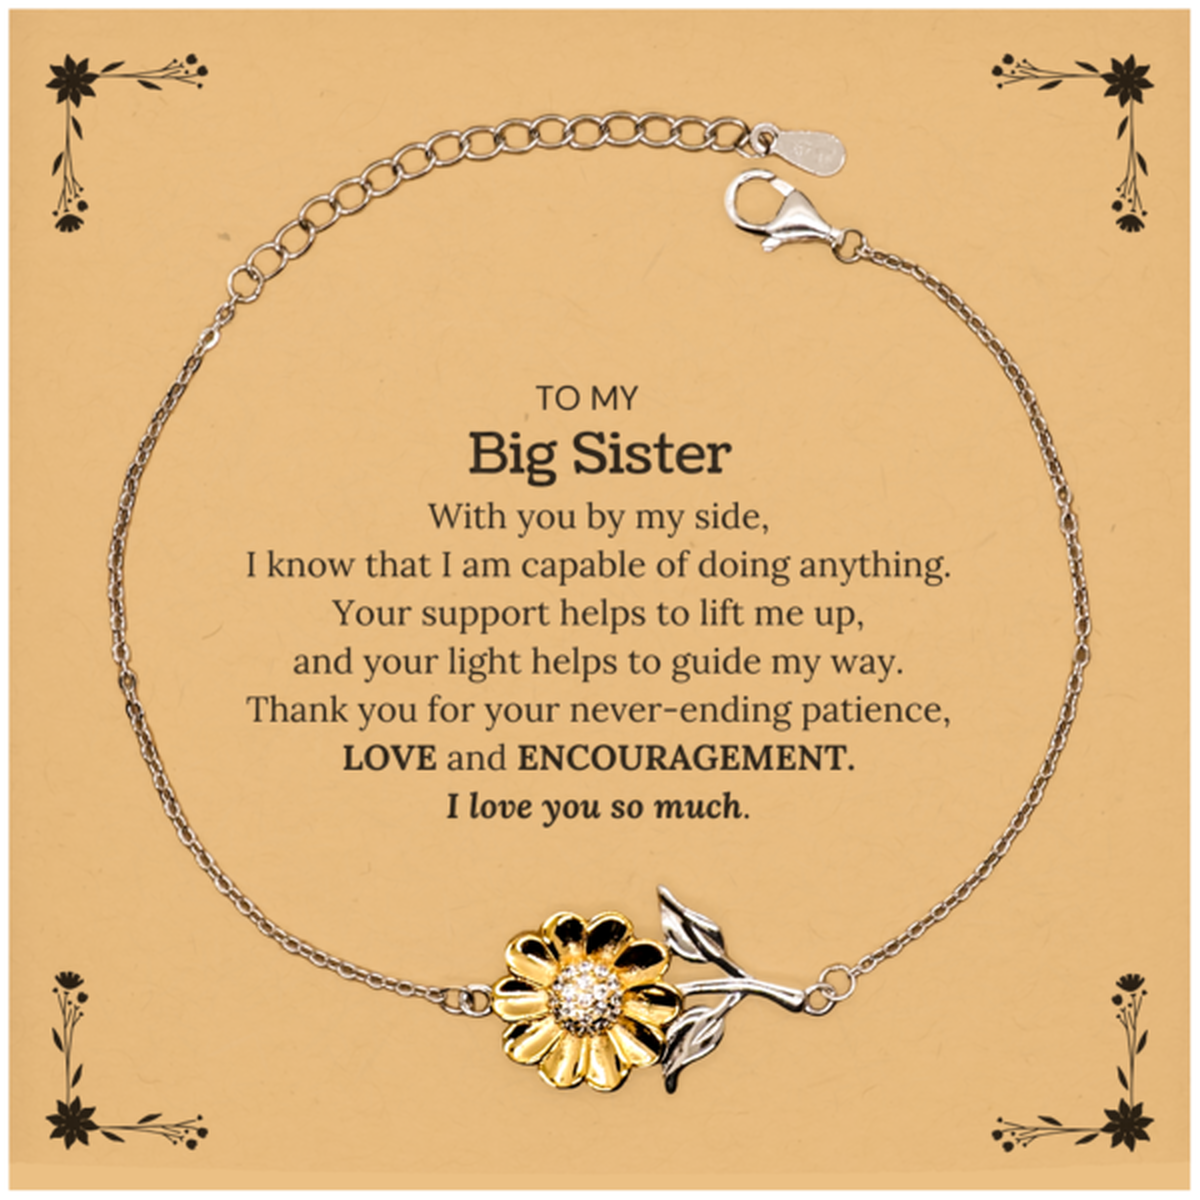 Appreciation Big Sister Sunflower Bracelet Gifts, To My Big Sister Birthday Christmas Wedding Keepsake Gifts for Big Sister With you by my side, I know that I am capable of doing anything. I love you so much